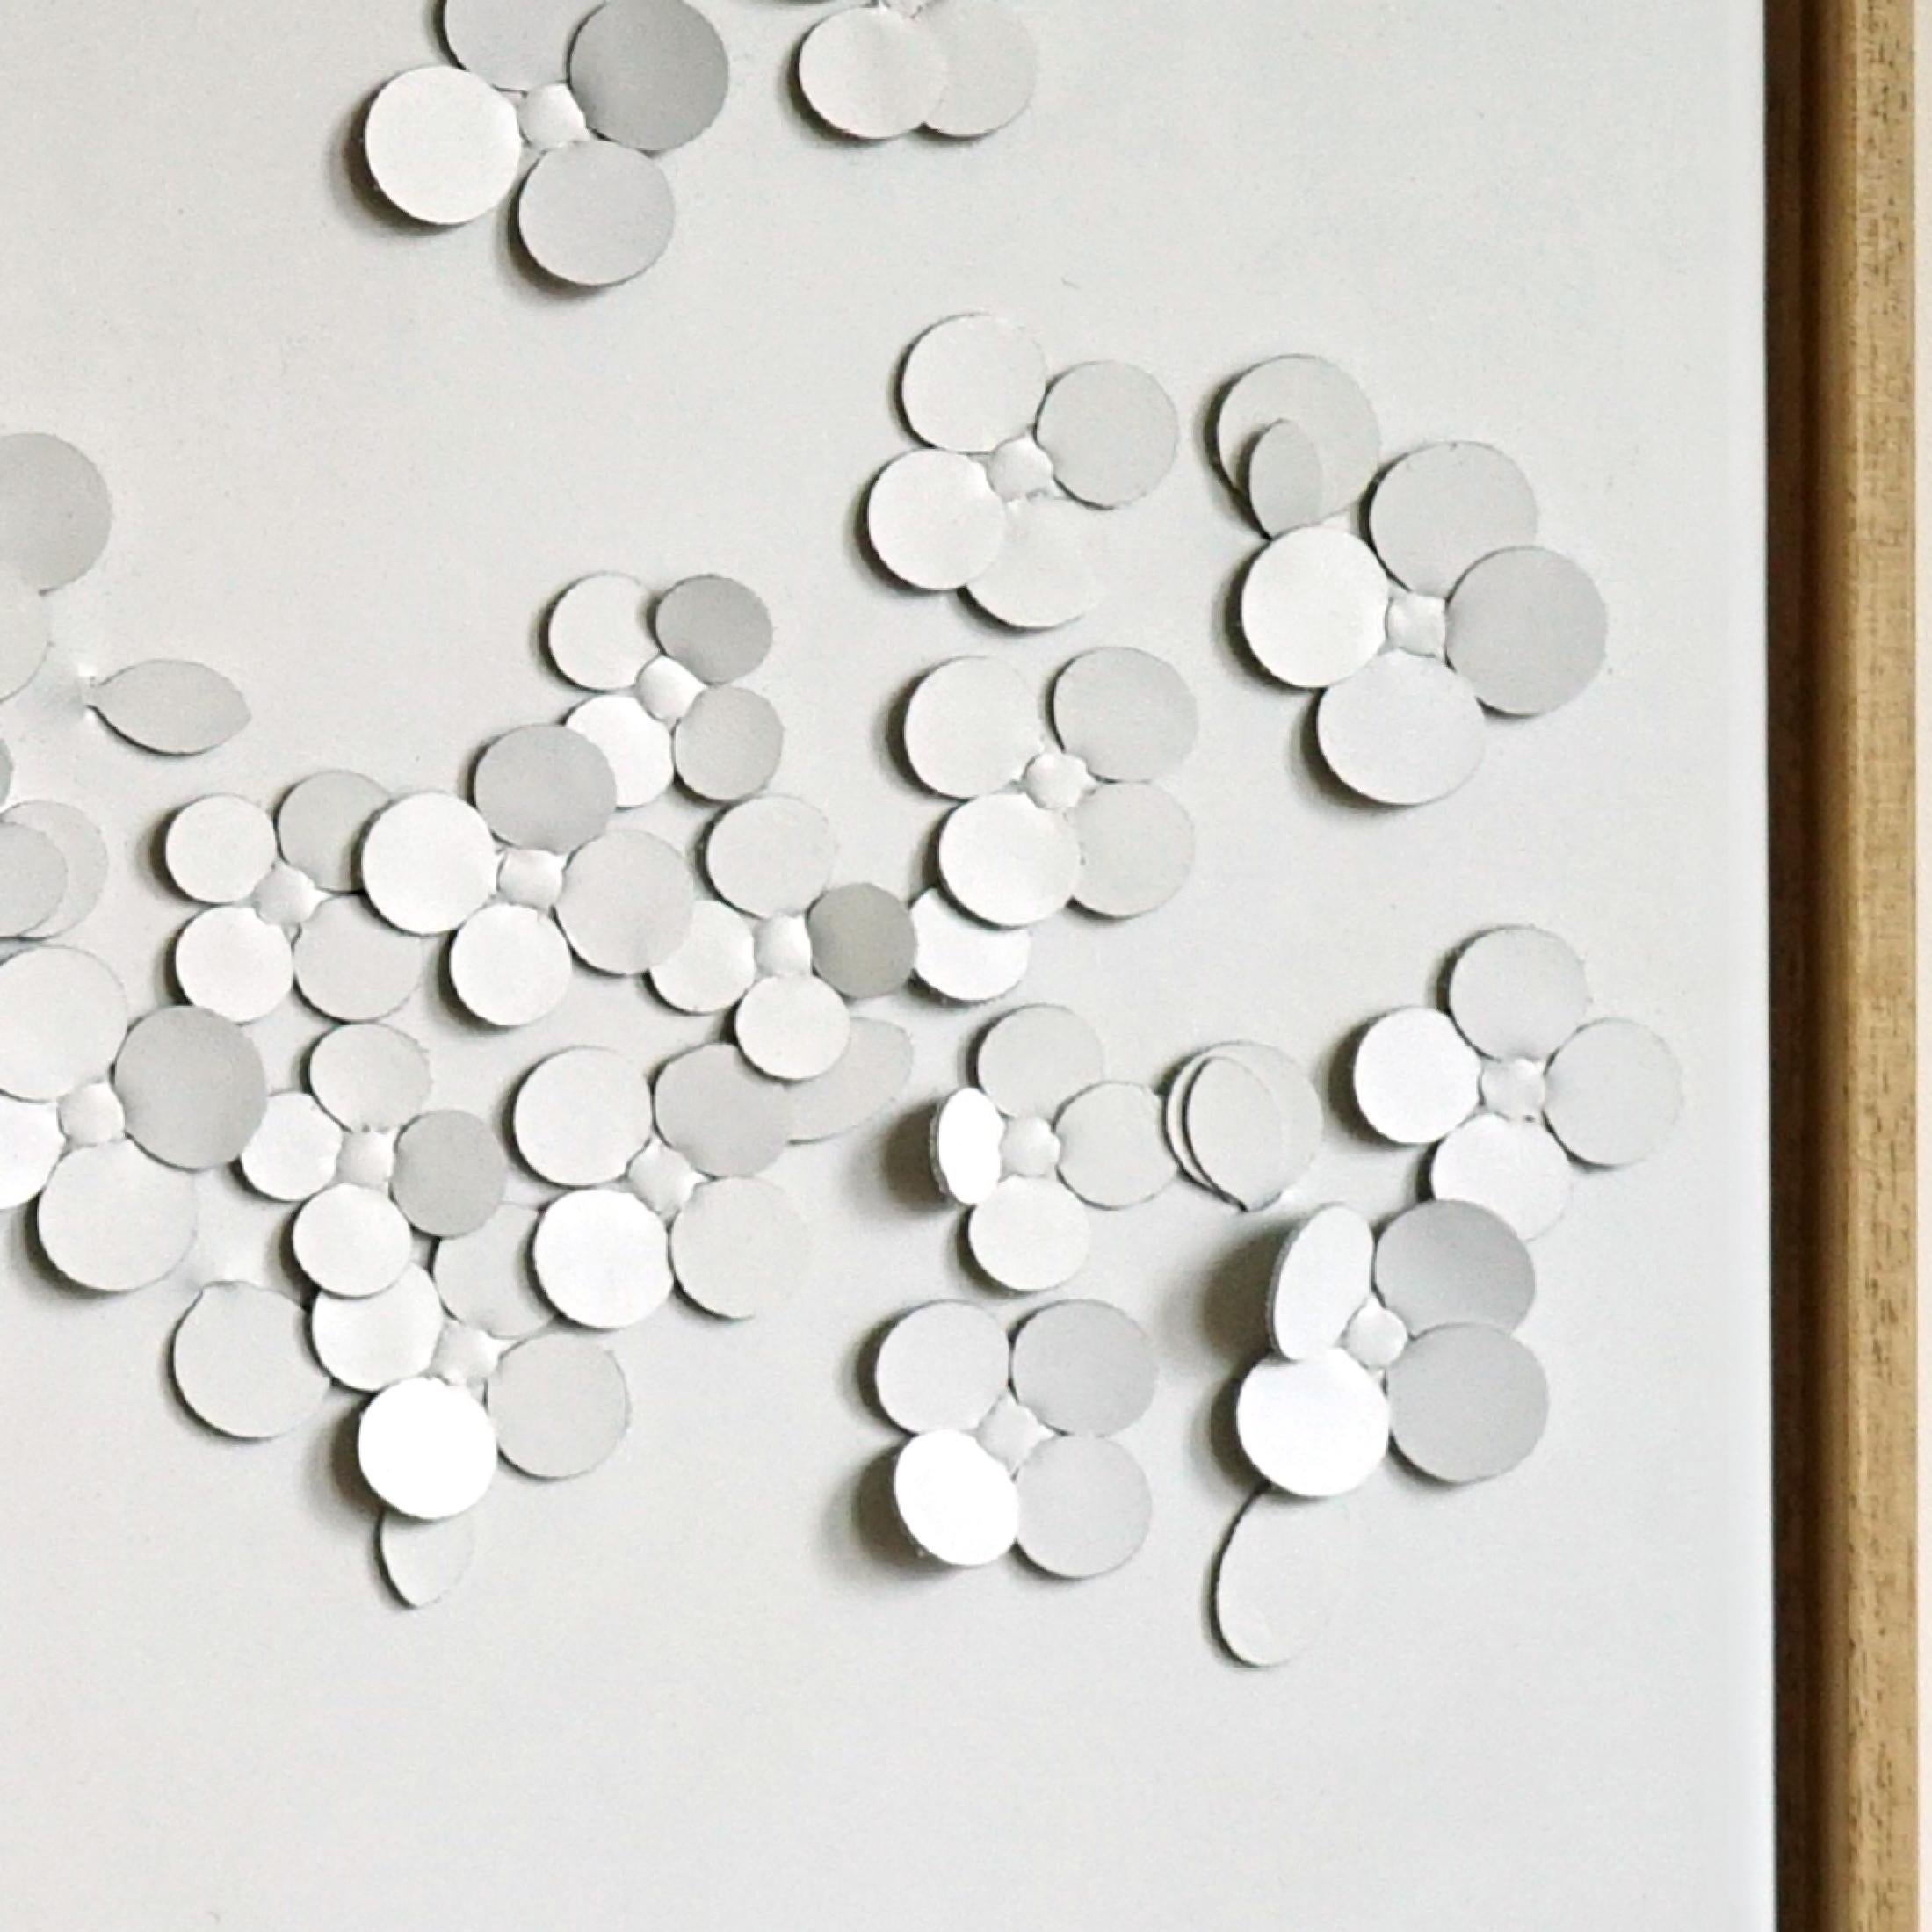 Blossom:

A piece of 3D sculptural wall art designed and made from two layers of white leather, woven together by Louise Heighes.
Measurements are 25.5 x 25.5 inches or 65 x 65 cm

This piece is inspired by the sudden appearance of blossom that